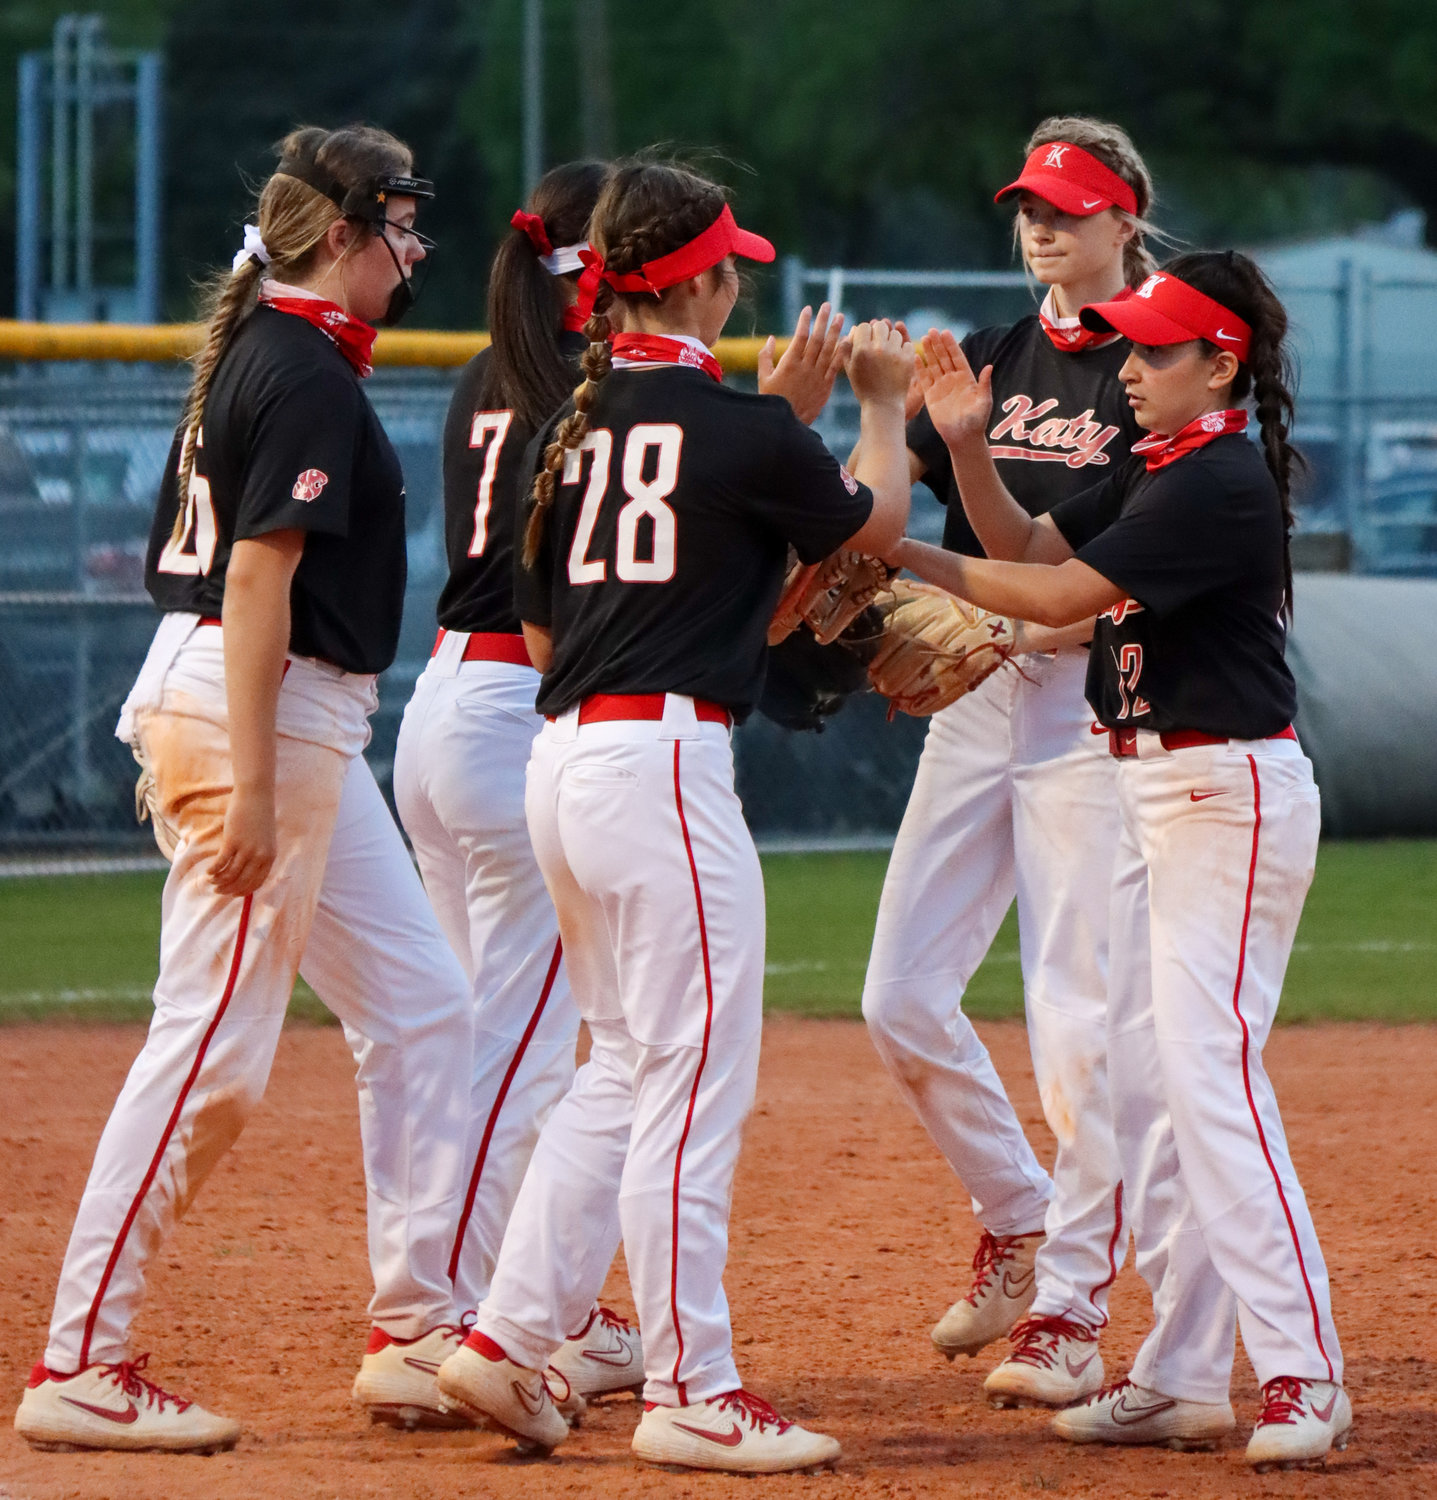 Katy High’s softball team won its sixth straight outright district championship via 9-0 win over Taylor on Saturday, April 10.